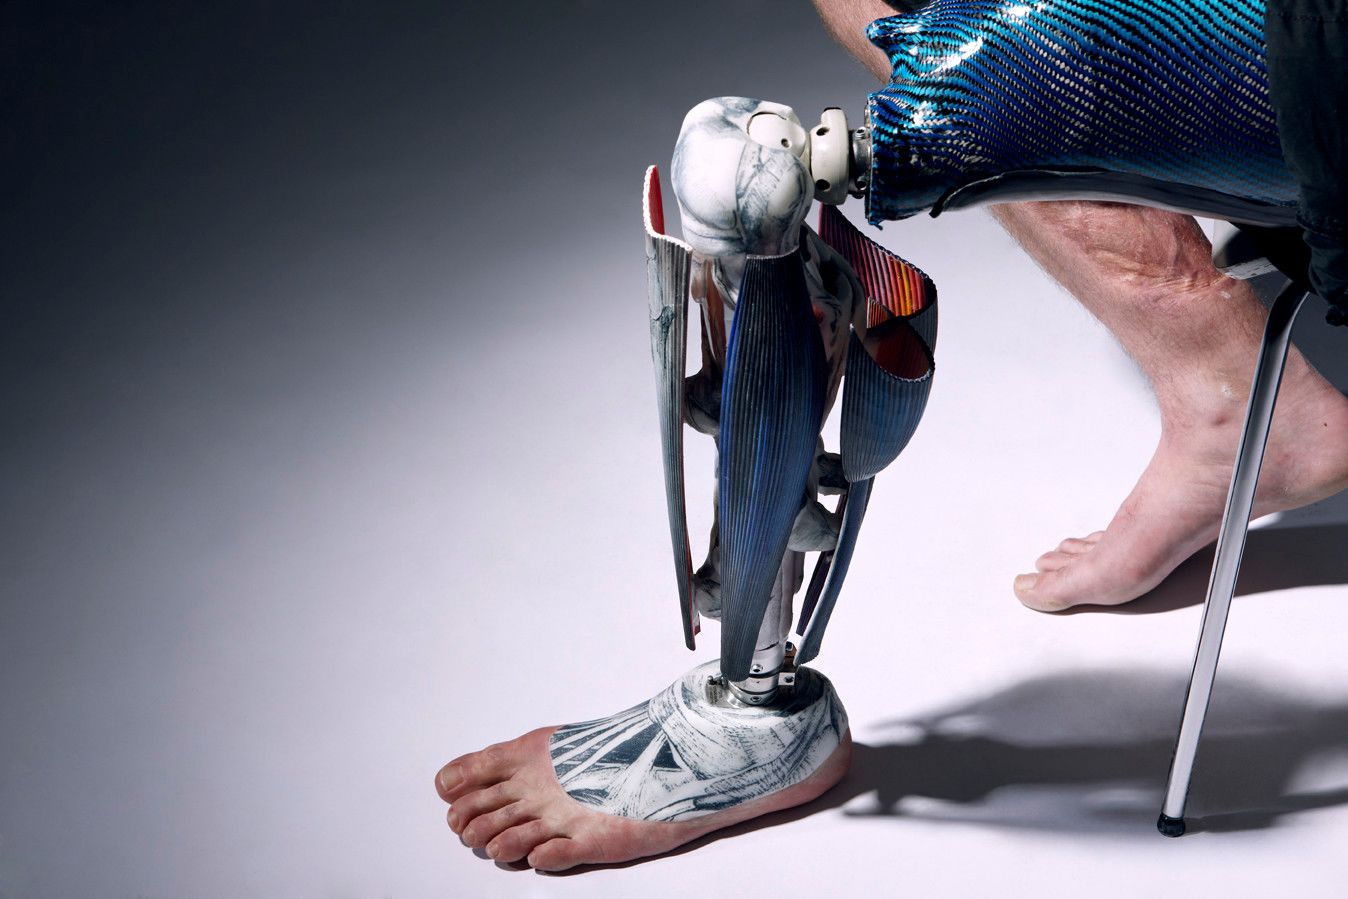 Snake arms and crystal legs: Artificial limbs push boundaries of